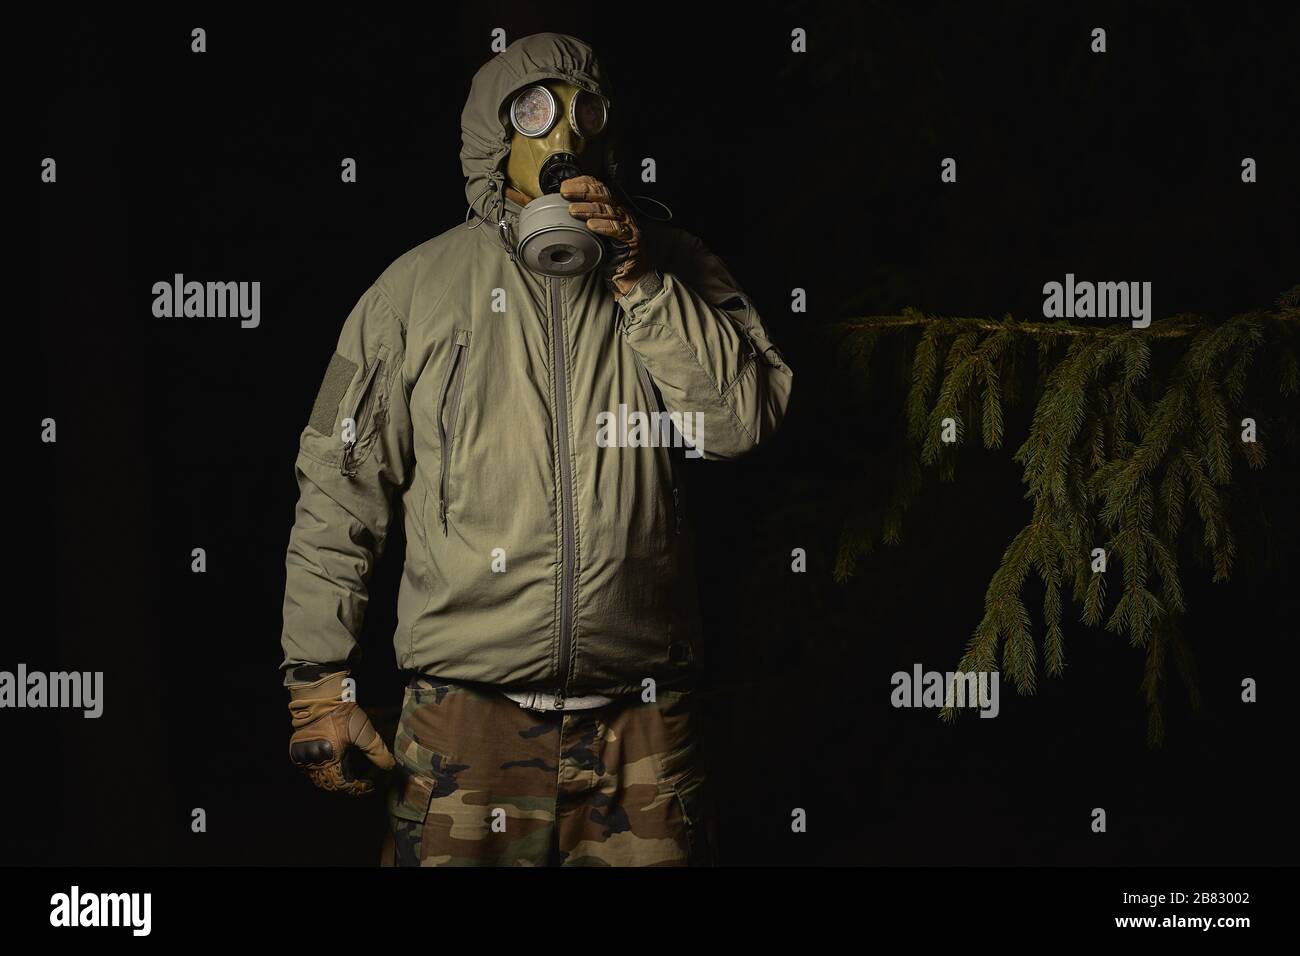 man in a gas mask protects himself from coronavirus Stock Photo